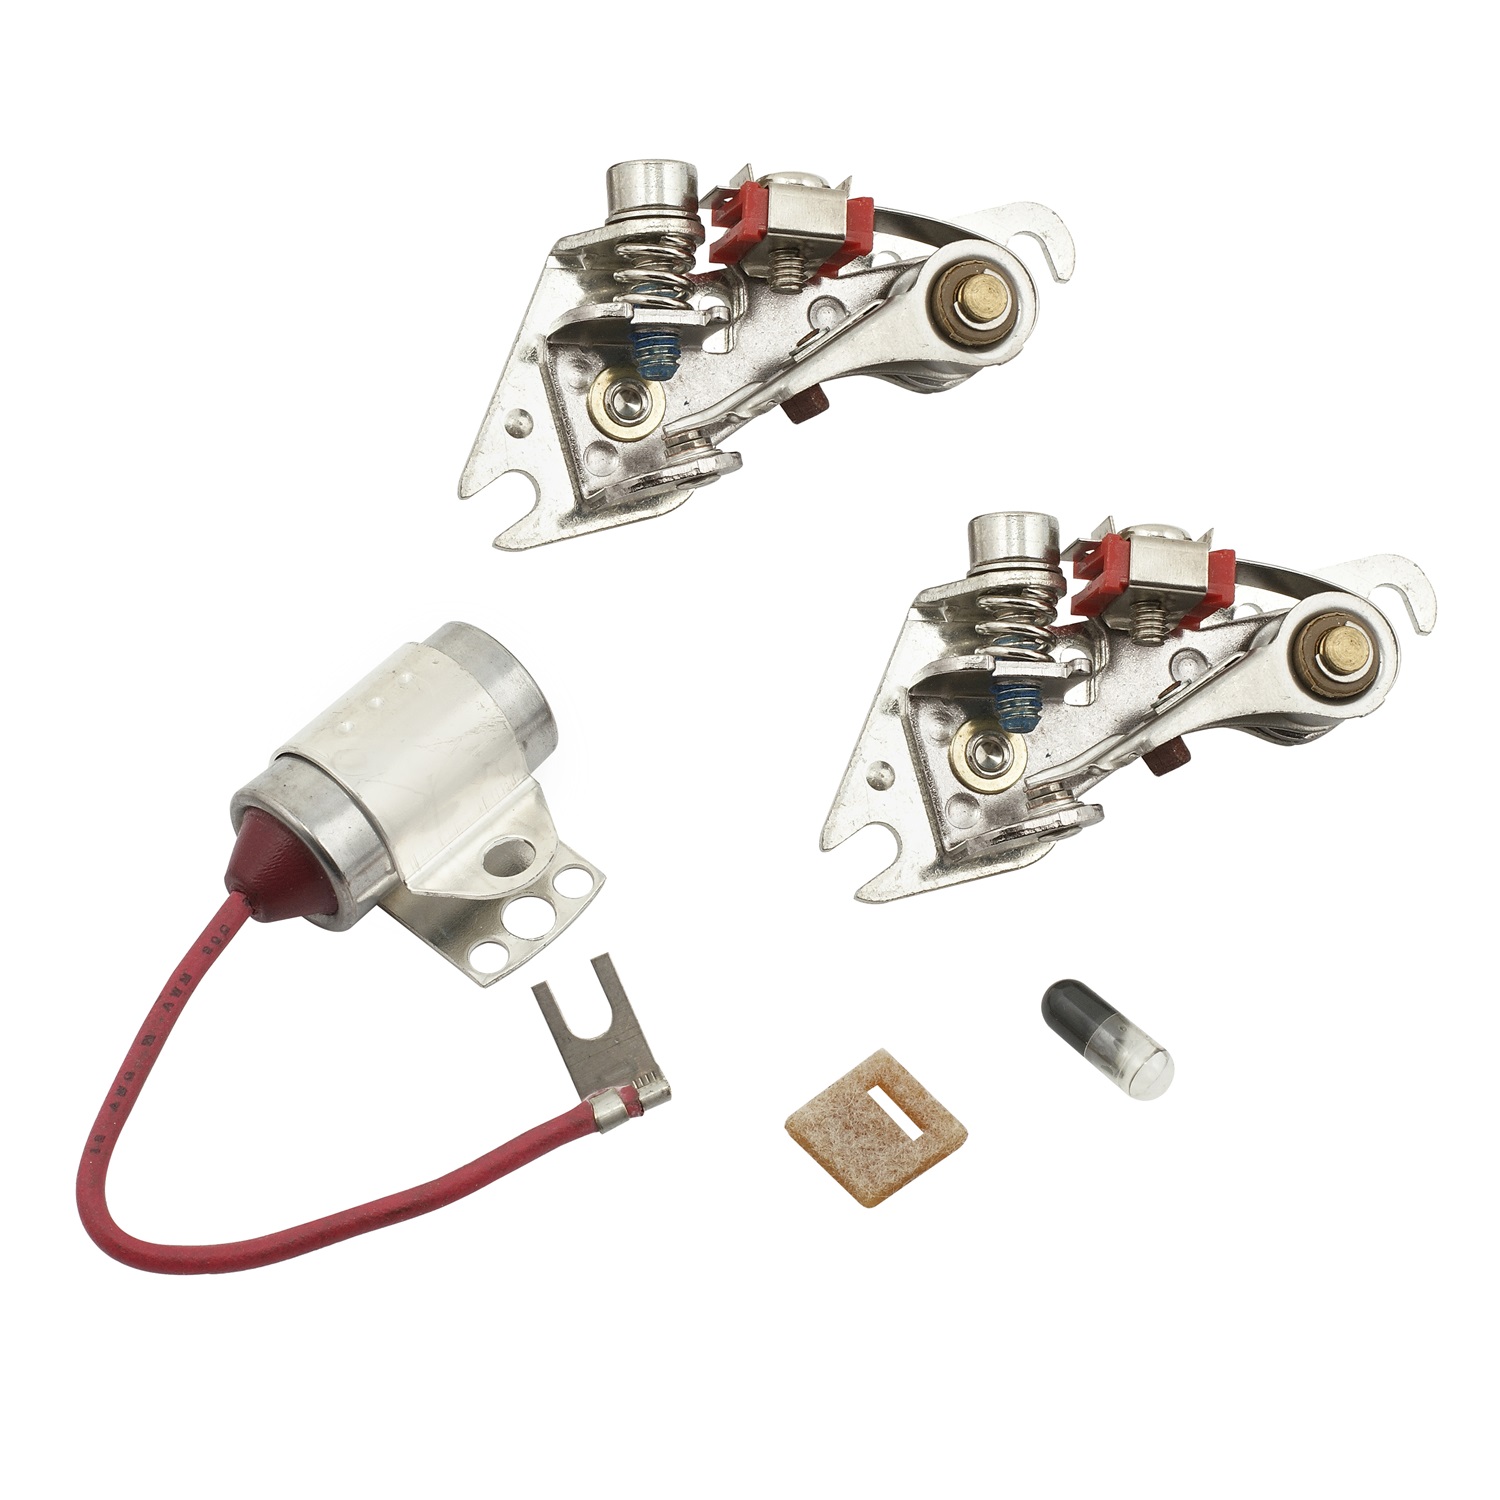 ACCEL ACCEL 8329 Racing; Distributor Contact Points & Condenser